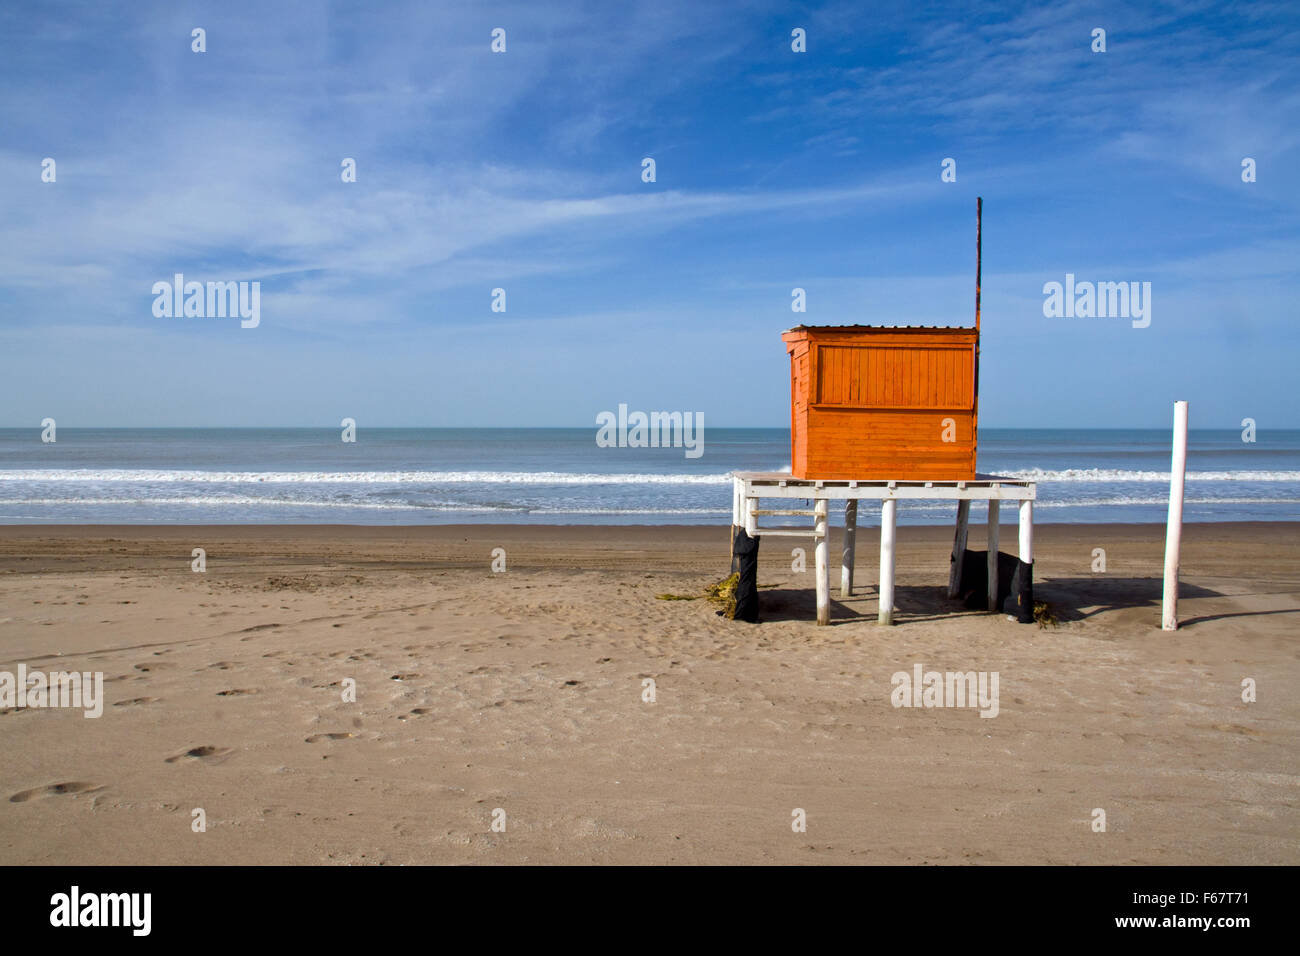 Lifeguard in Villa Gesell at the argentinean atlantic coast Stock Photo